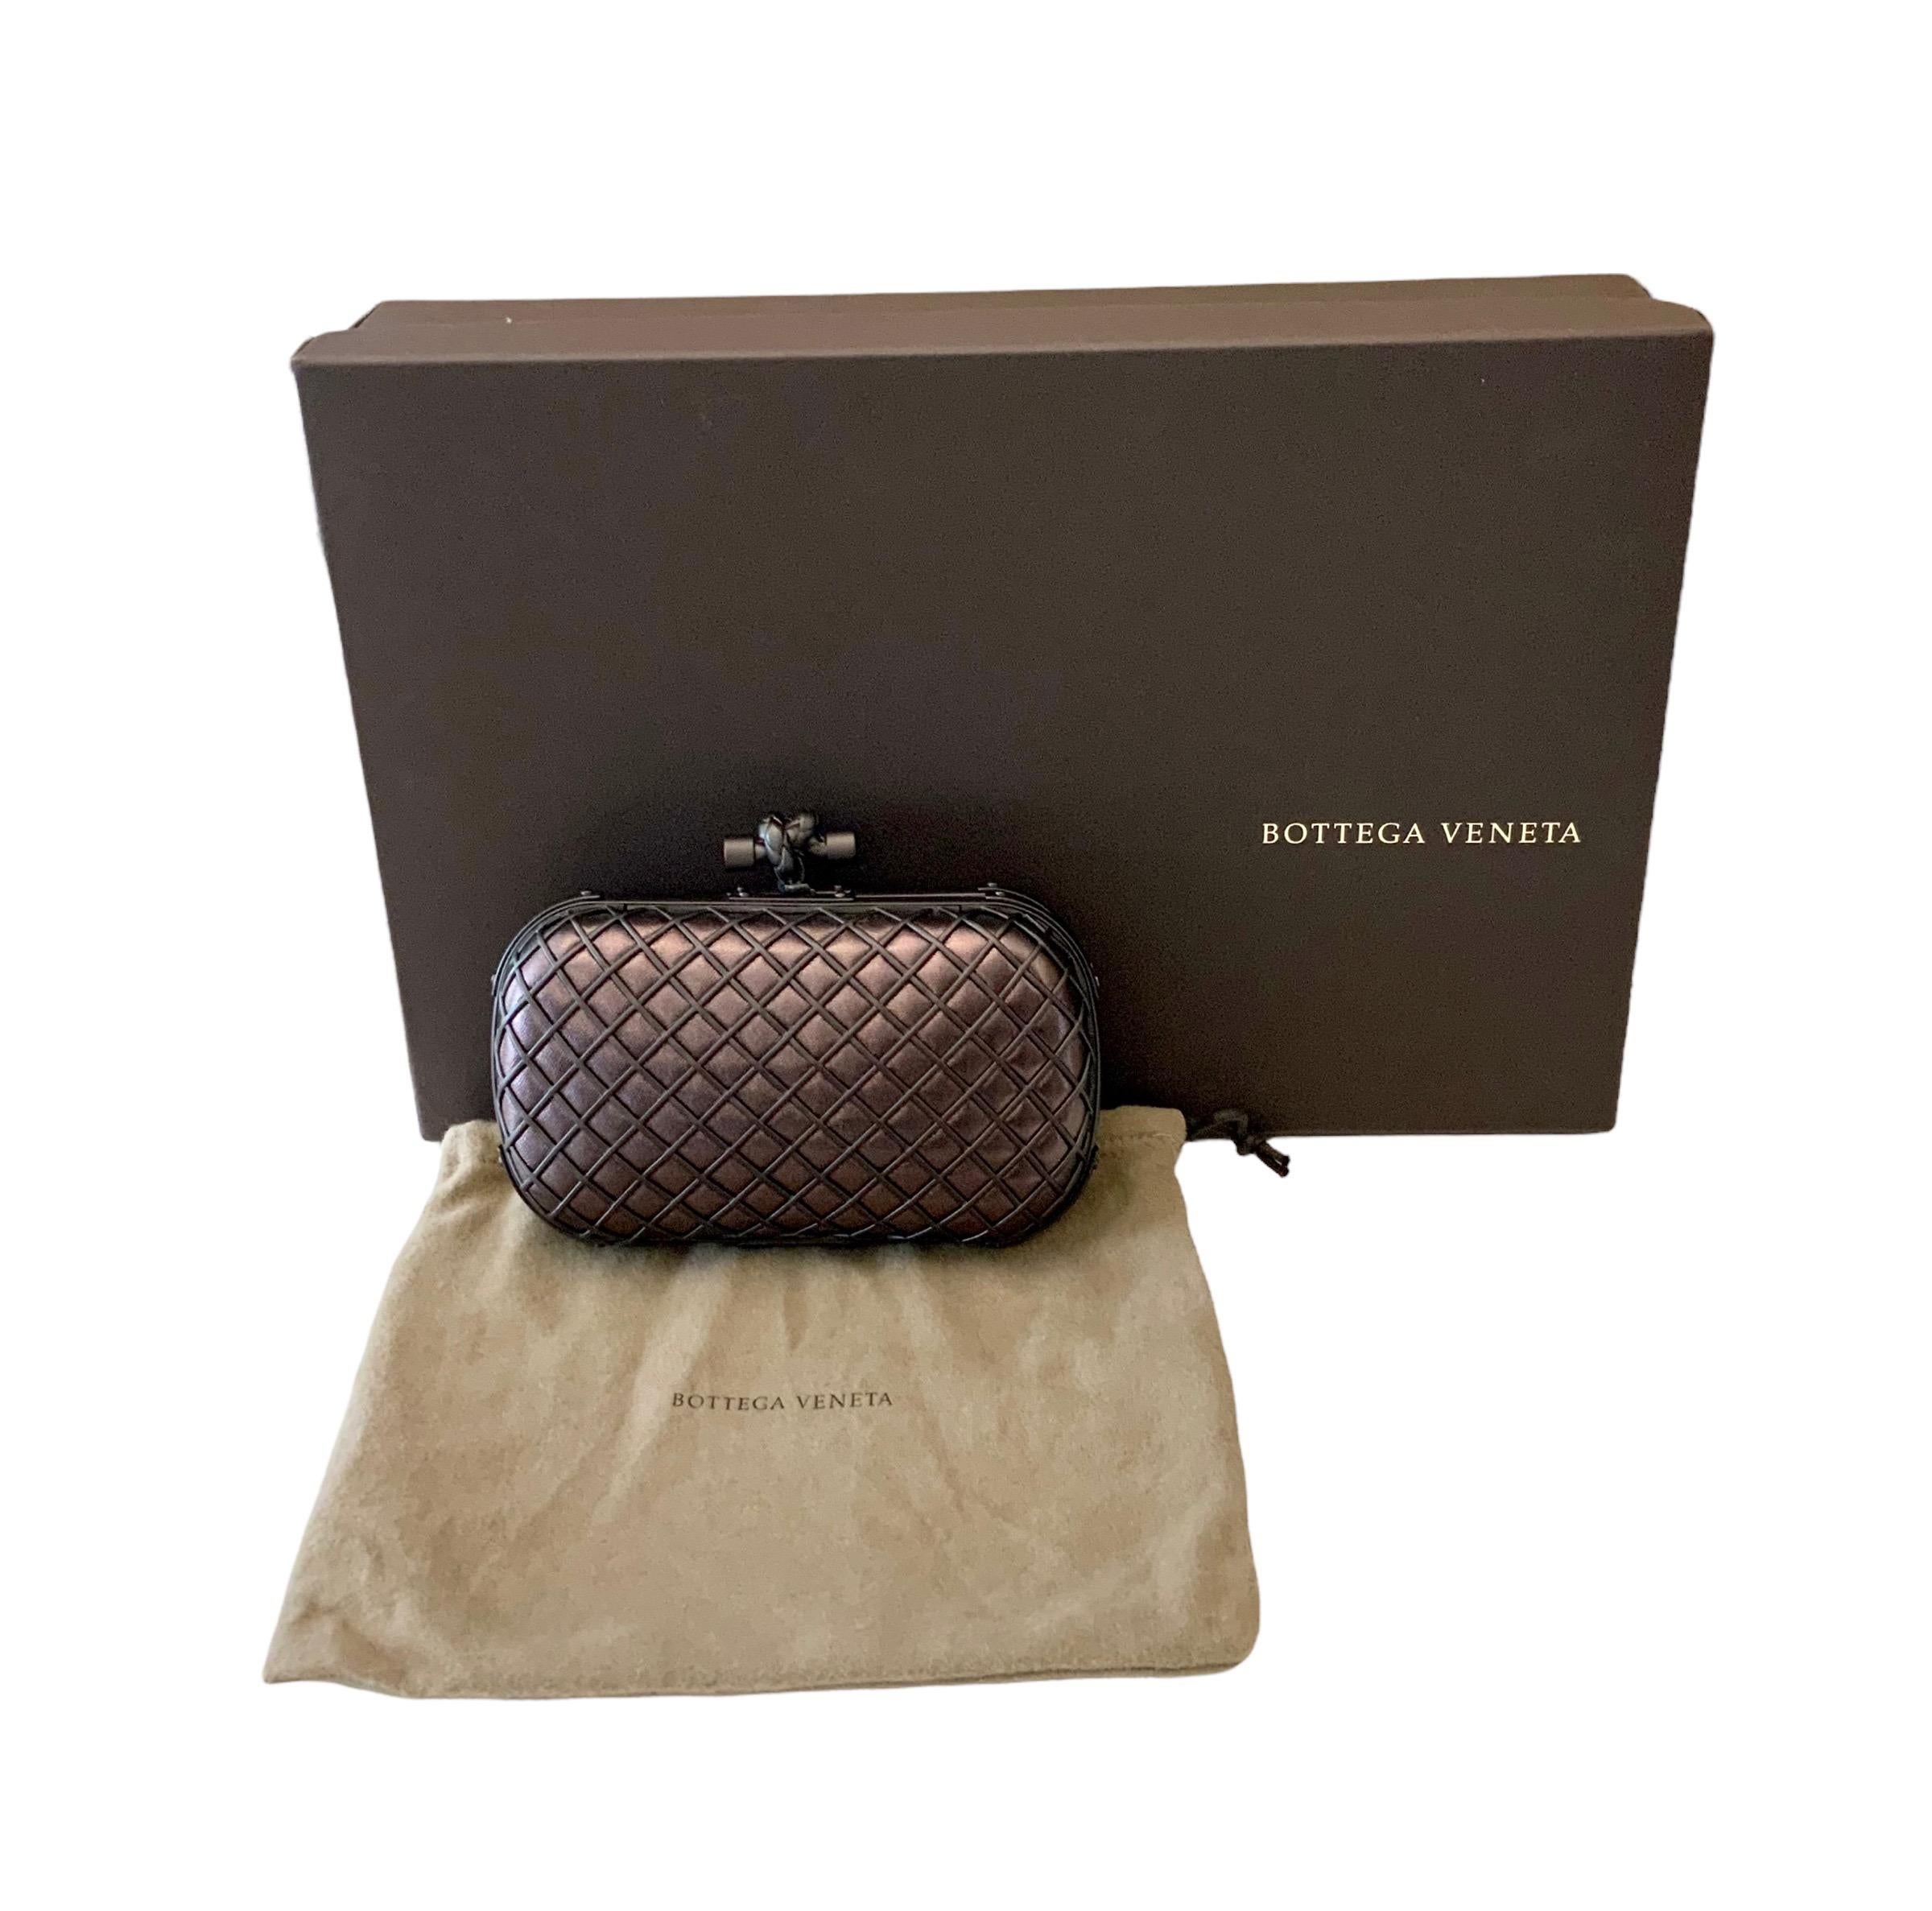 Our pre-owned but as NEW Bottega Veneta Metal Cage Knot Clutch is crafted in a dark brown metallic leather and its cage is made of a matte black metal. 
Exquisite piece !!

Material: Leather
Lining: suede
Color: Metallic brown
Measurements: 
Length: